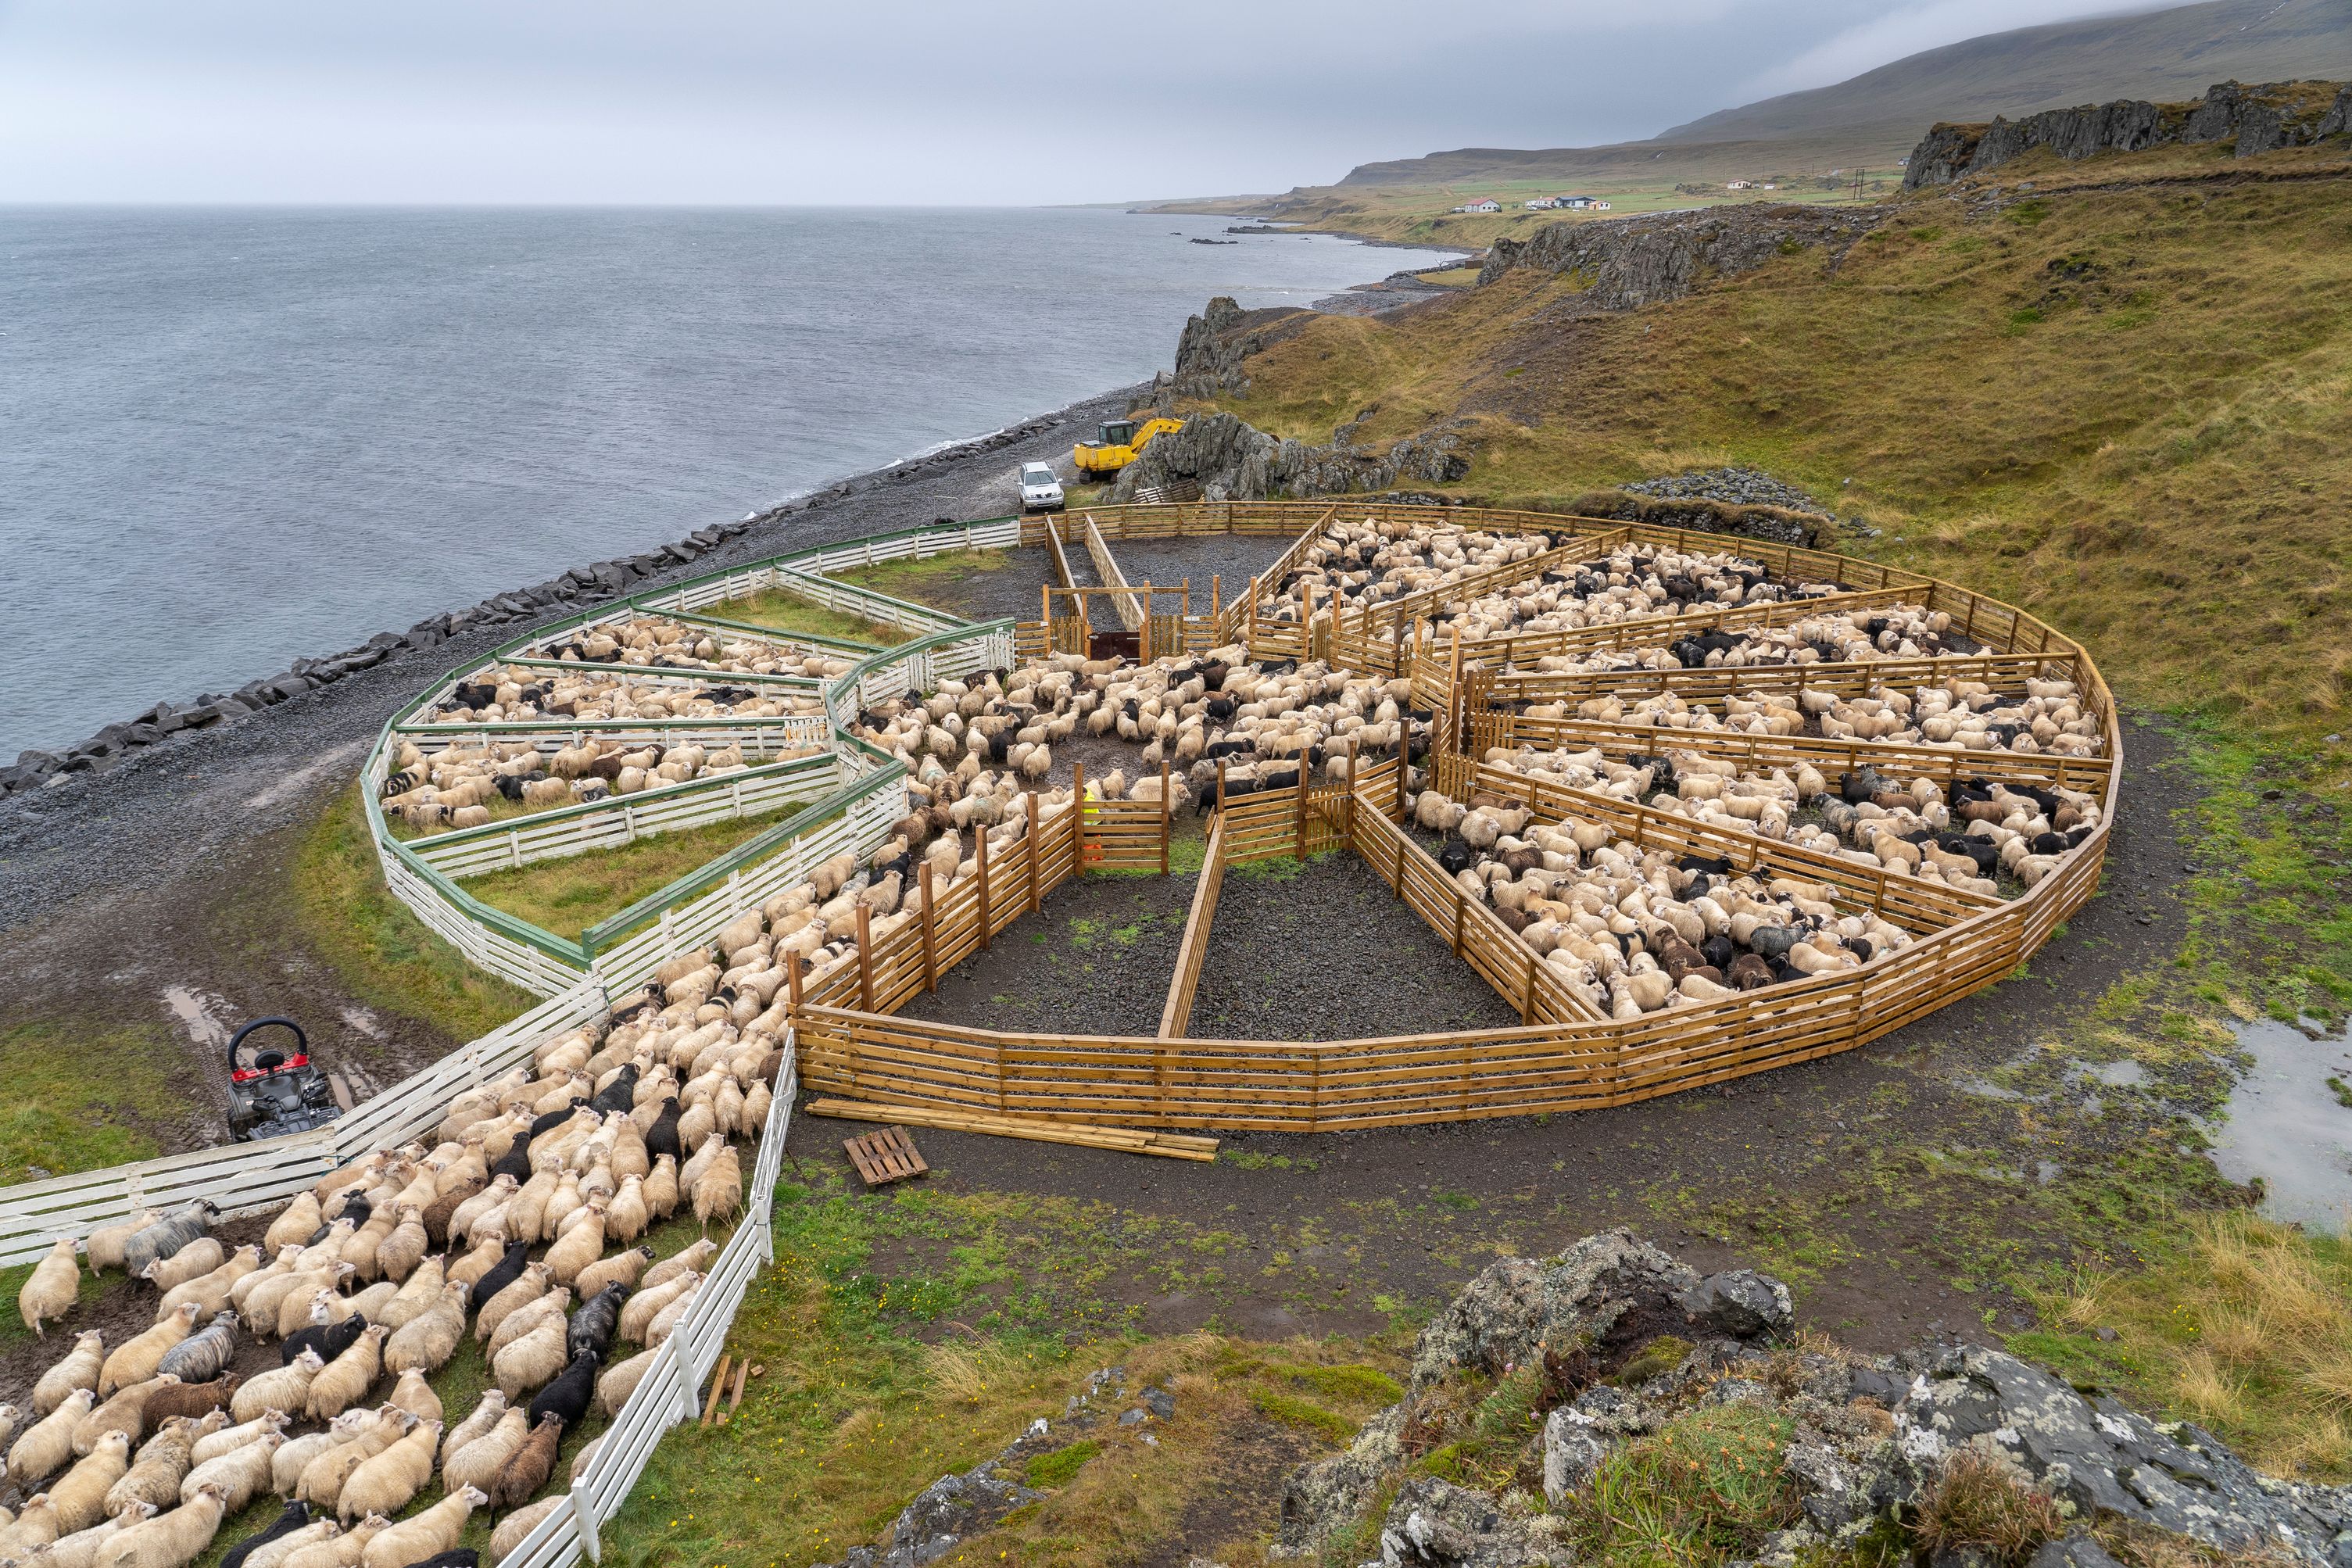 Icelandic sheep's in a Round-Up in Iceland